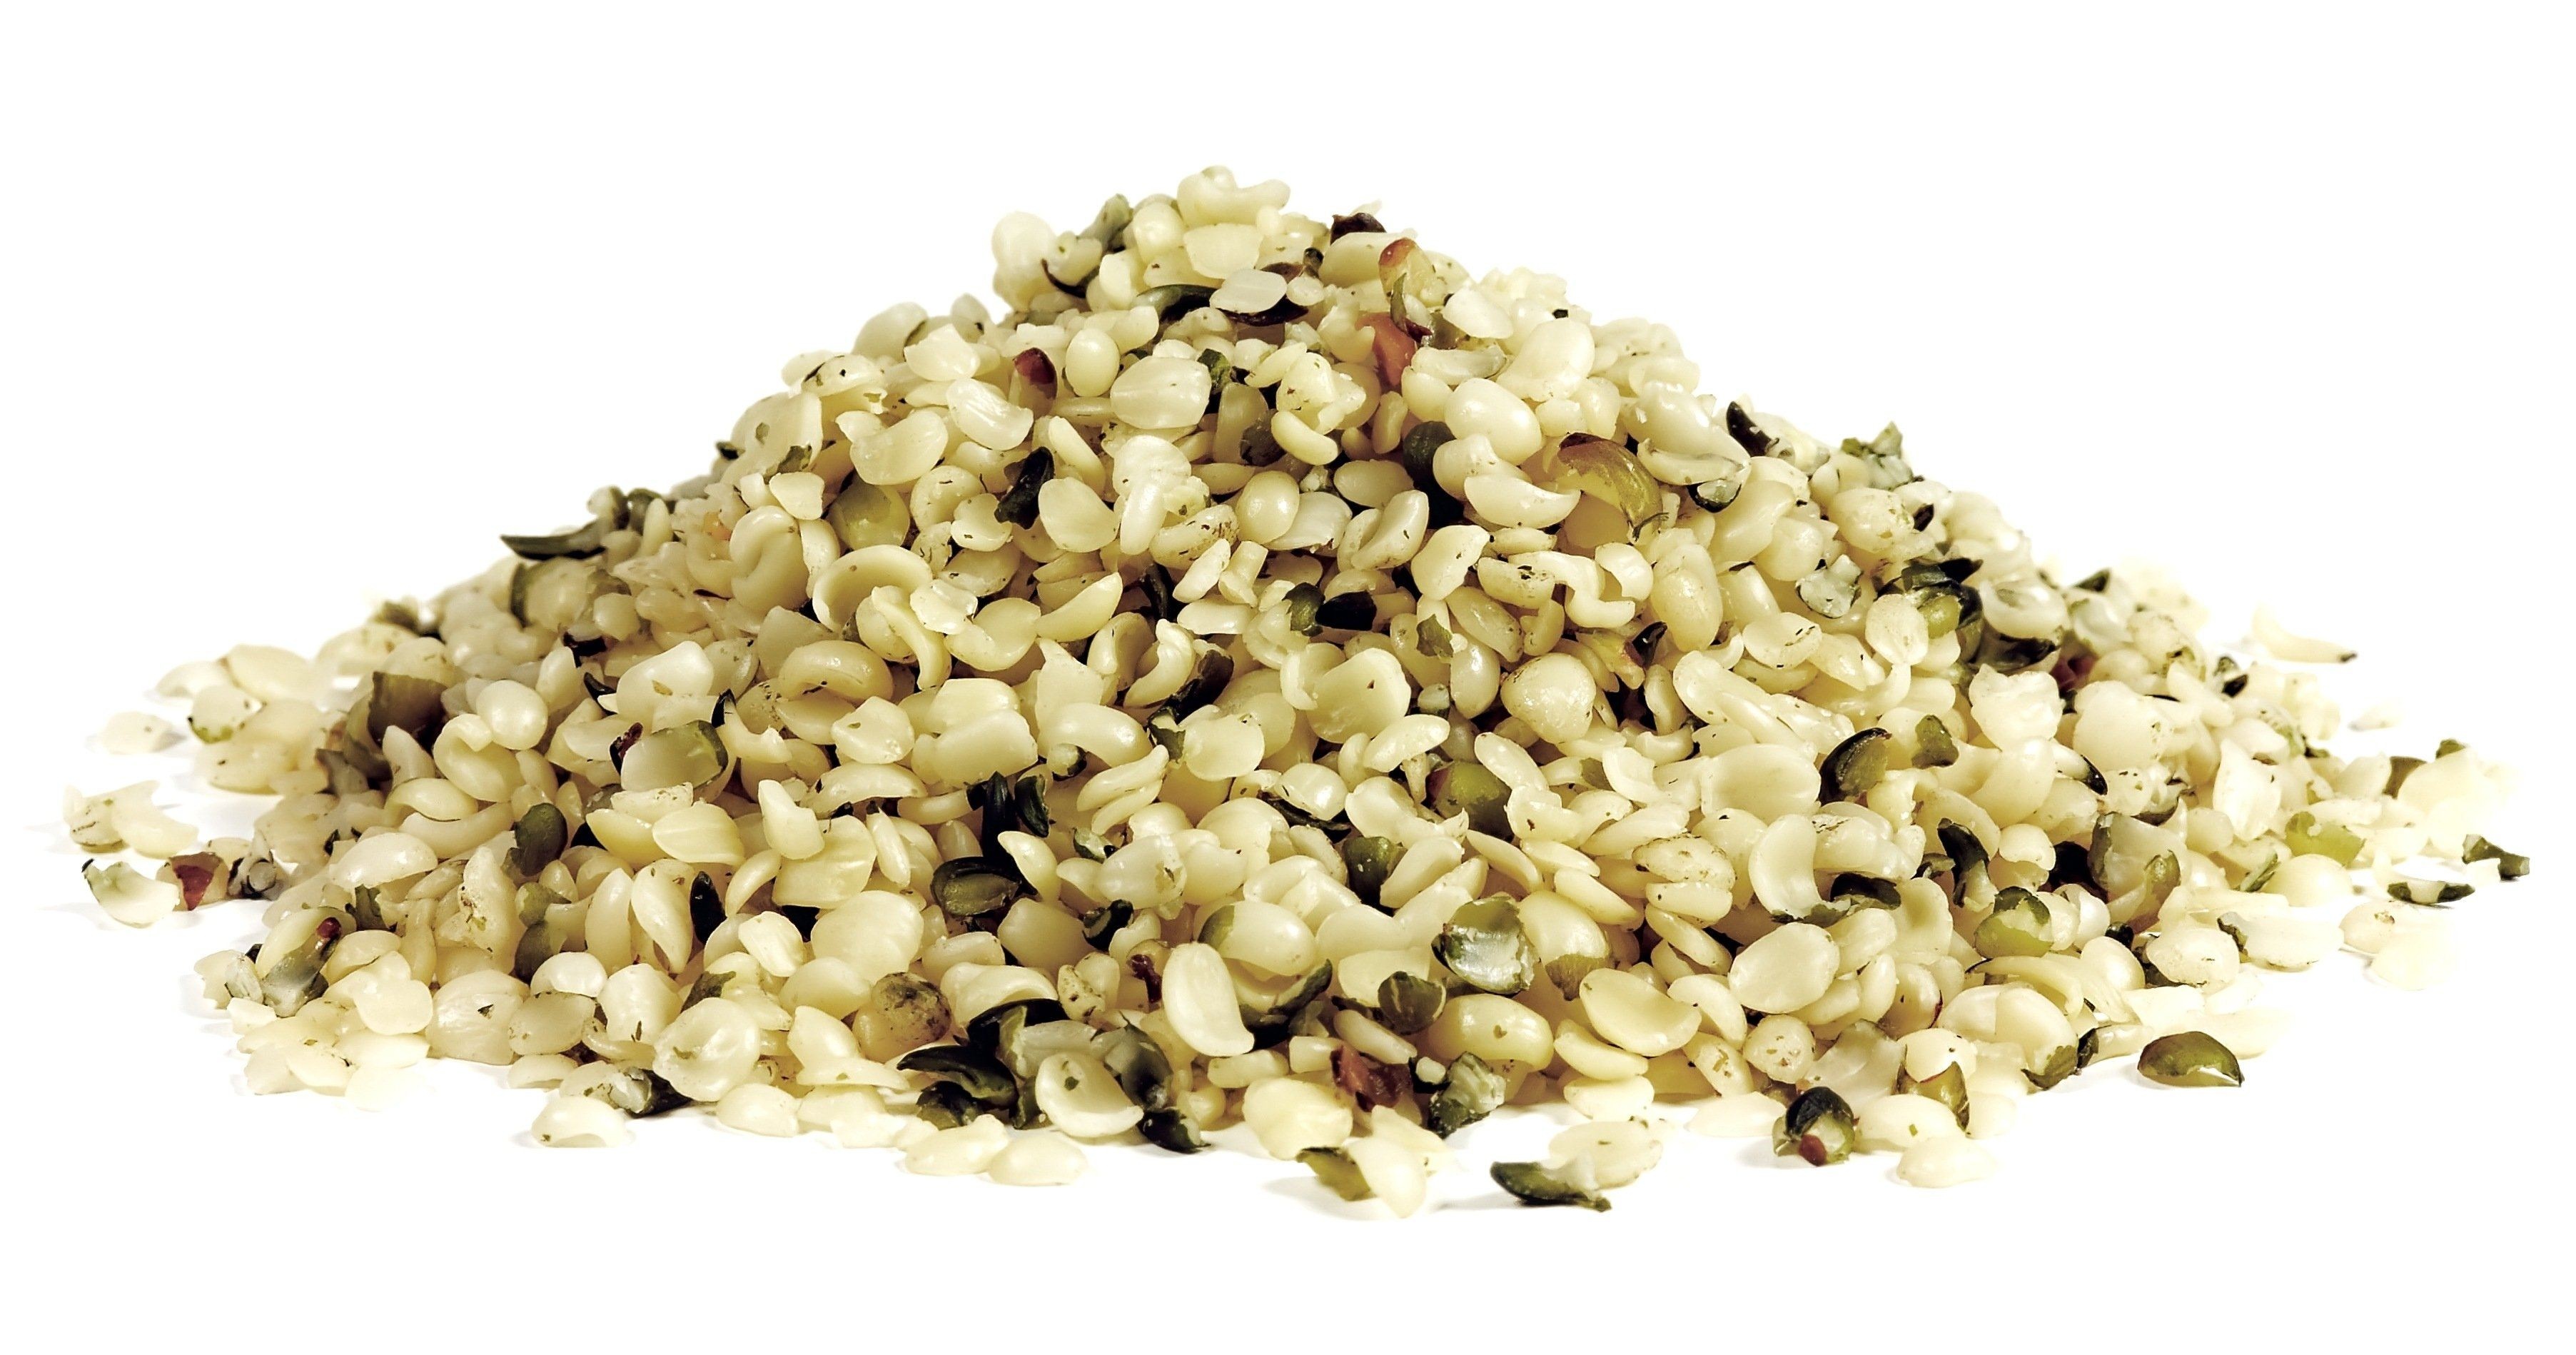 Raw and organic hemp seeds, Nutritious addition, Health-conscious purchase, Quality assurance, 3610x1900 HD Desktop